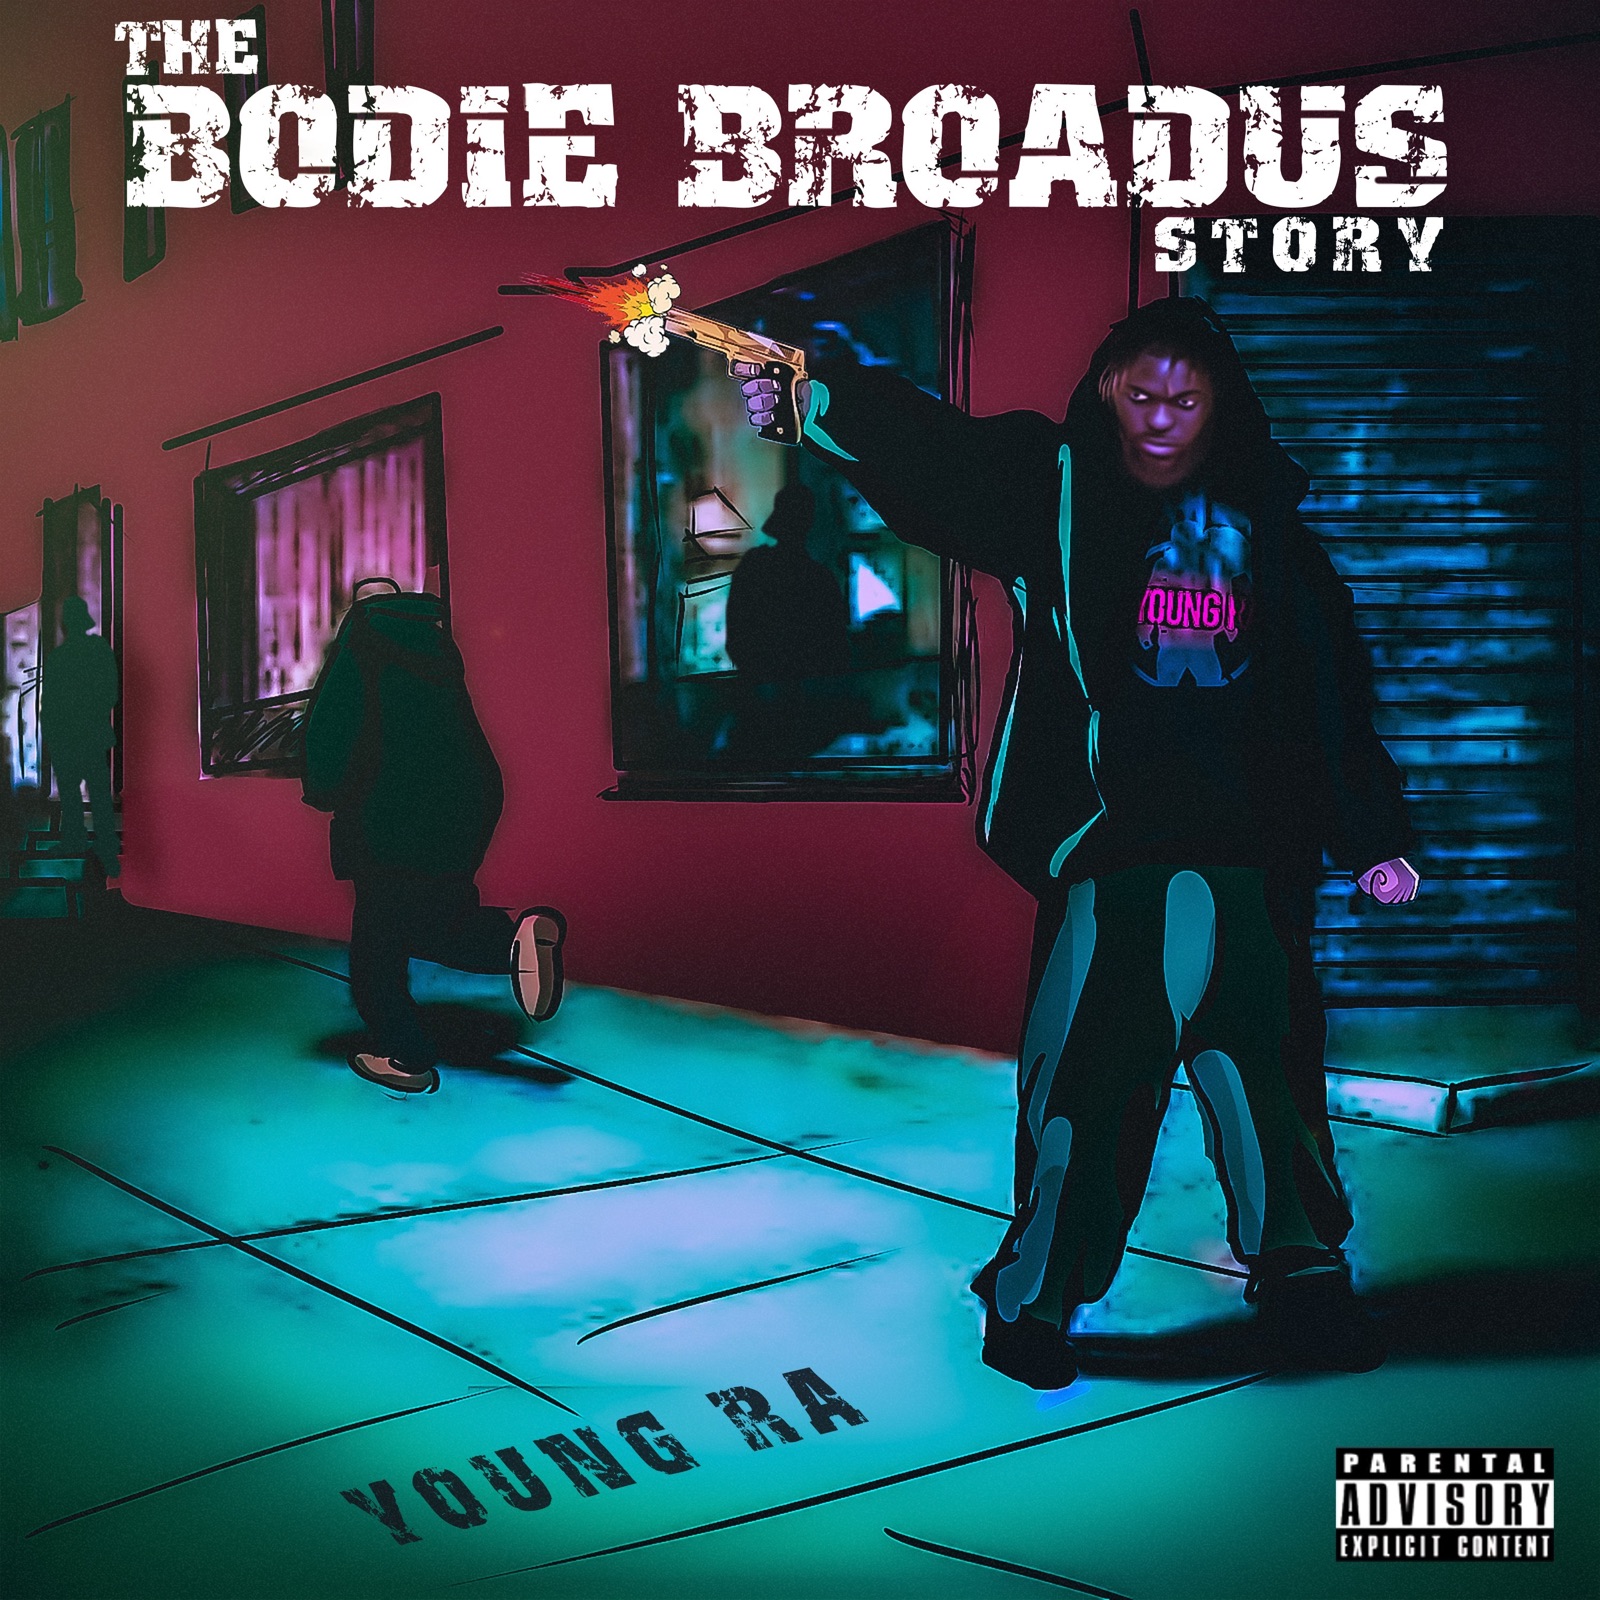 The Bodie Broadus Story